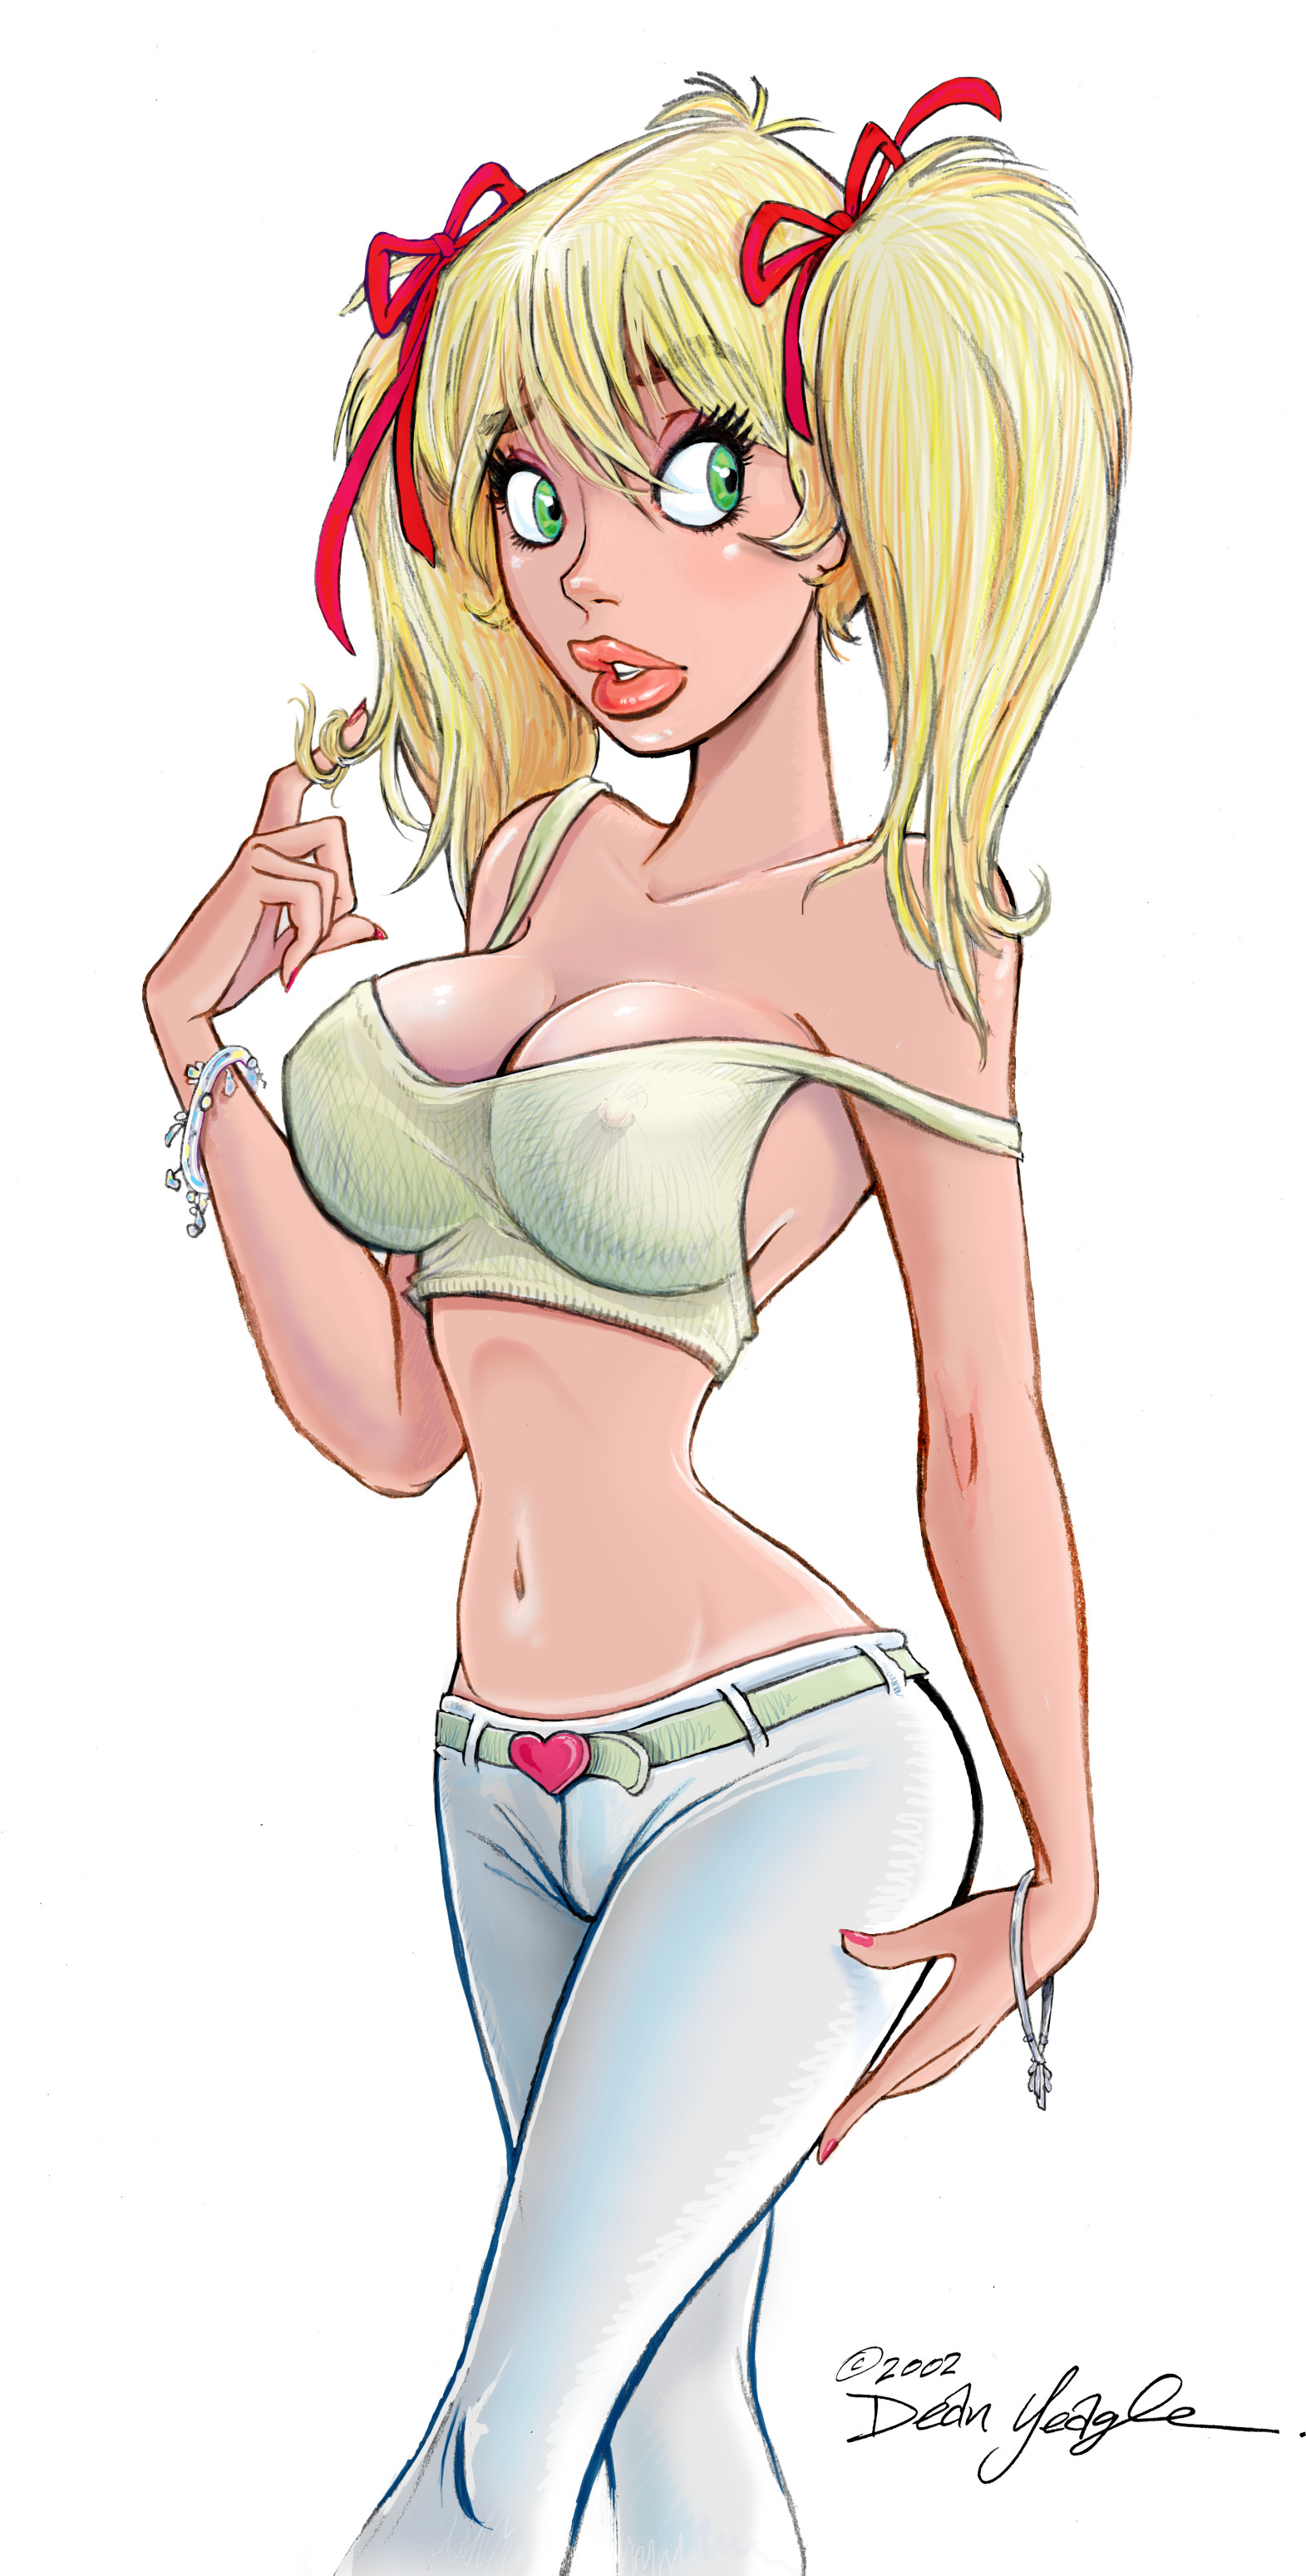 Anime 1571x3098 dean yeagle Mandy nipples through clothing belly button